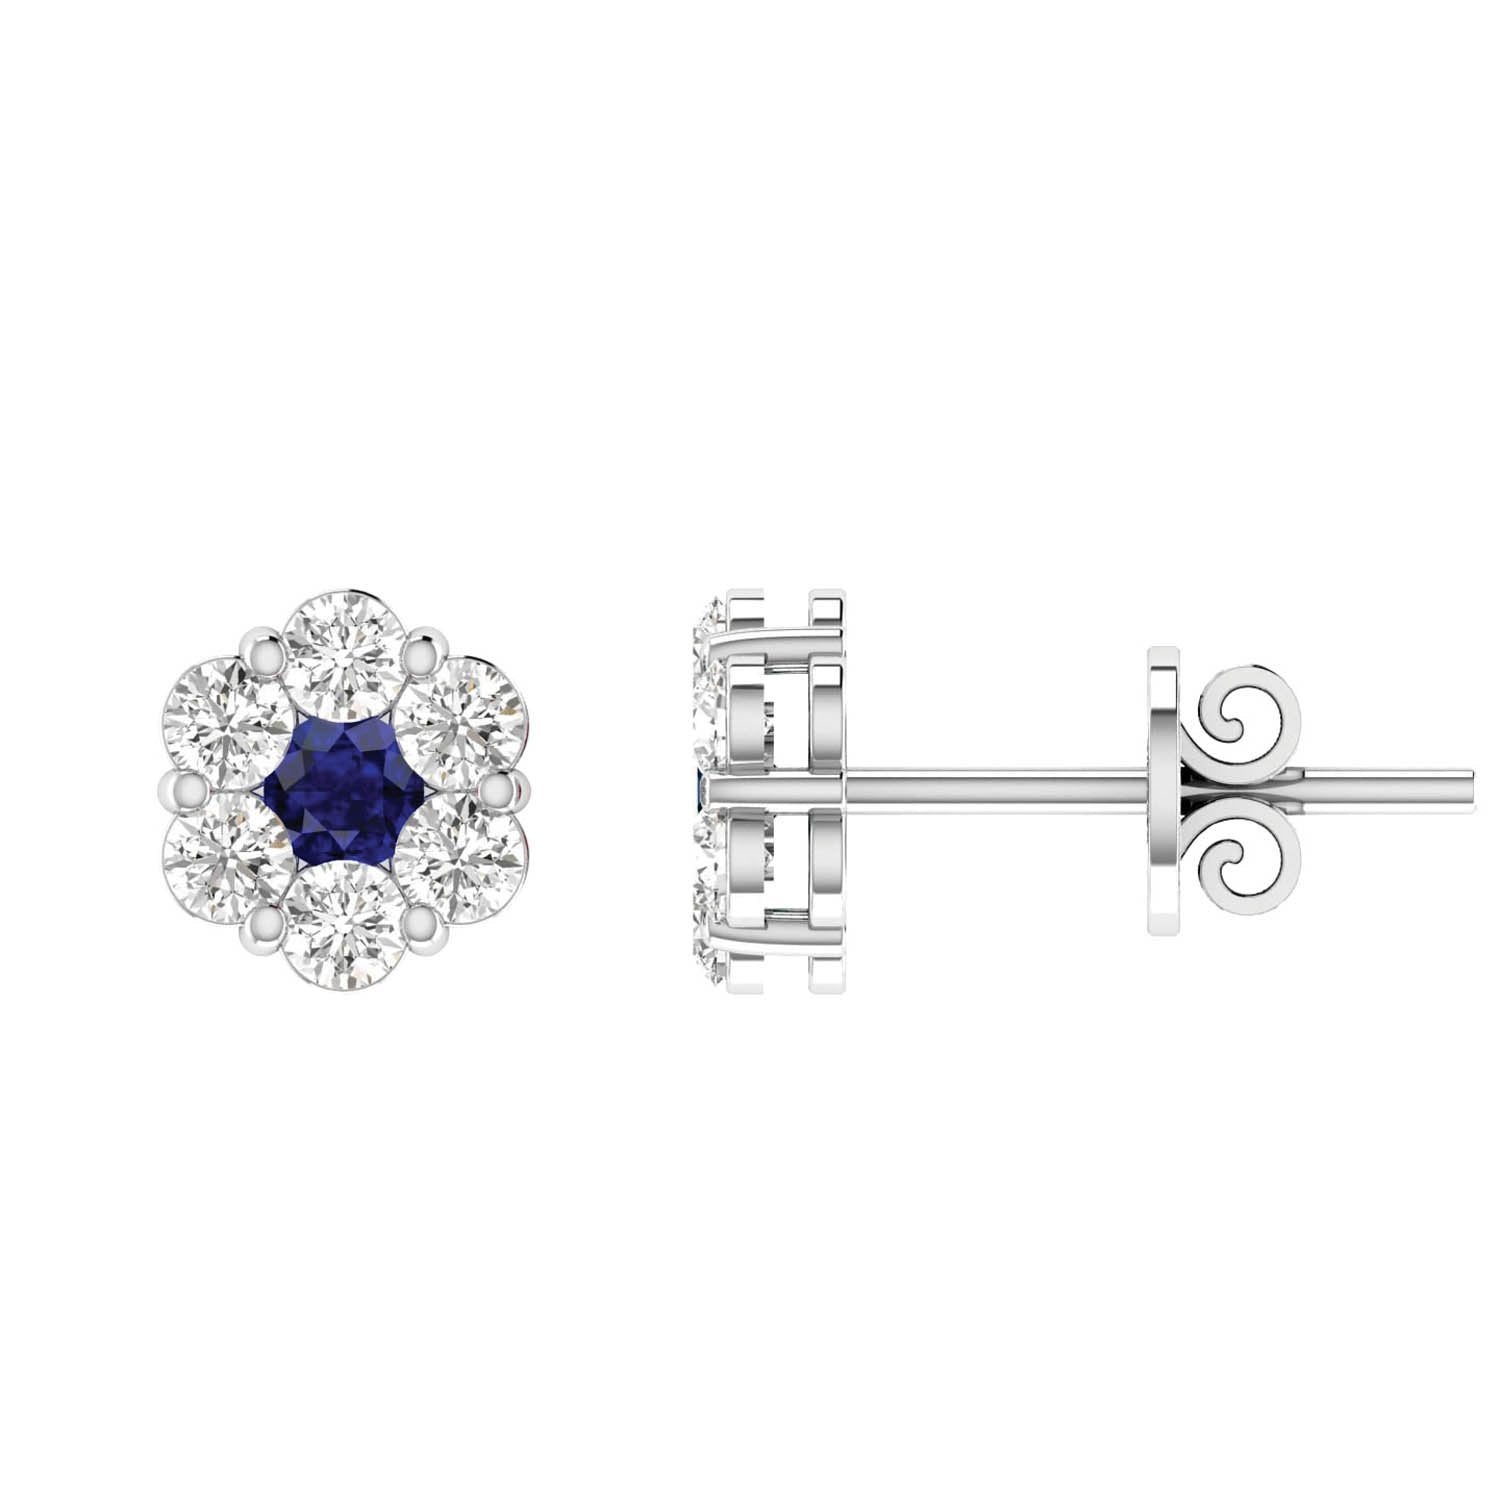 Sapphire Diamond Stud Earrings with 0.80ct Diamonds in 9K White Gold - 9WRE100GHS